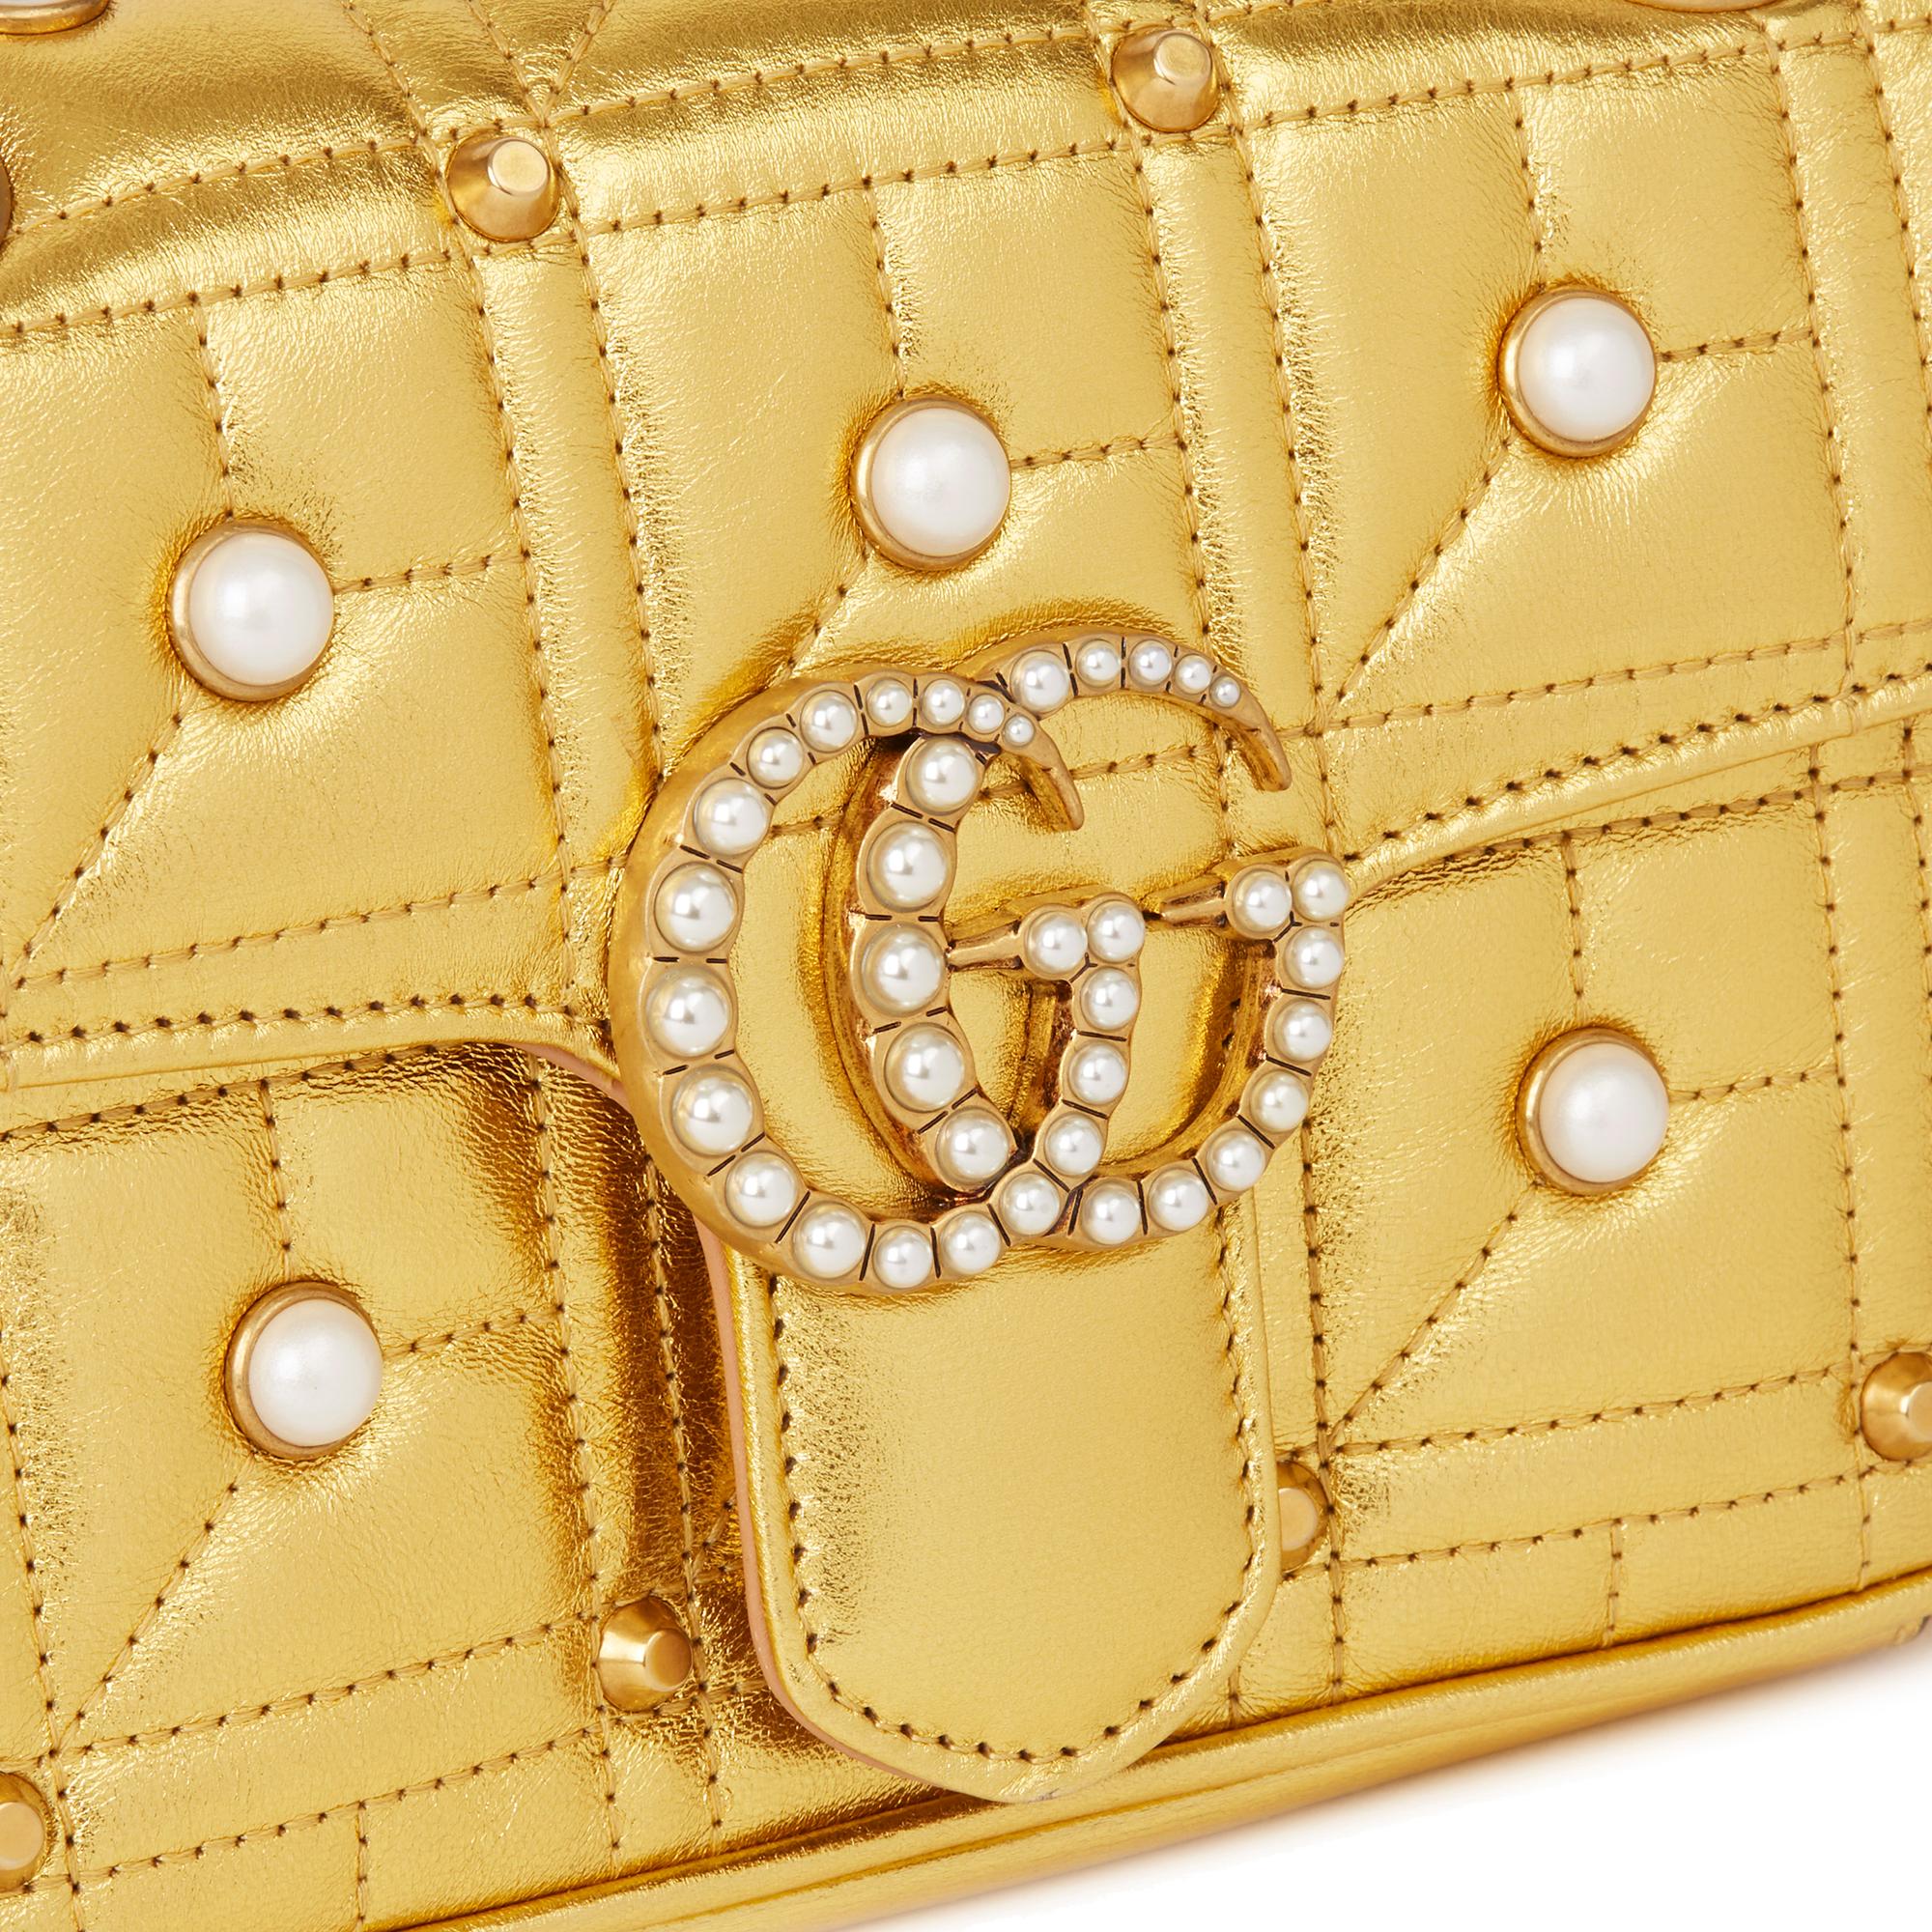 2019 Gucci Gold Quilted Metallic Lambskin Studded Pearl Mini Marmont  2